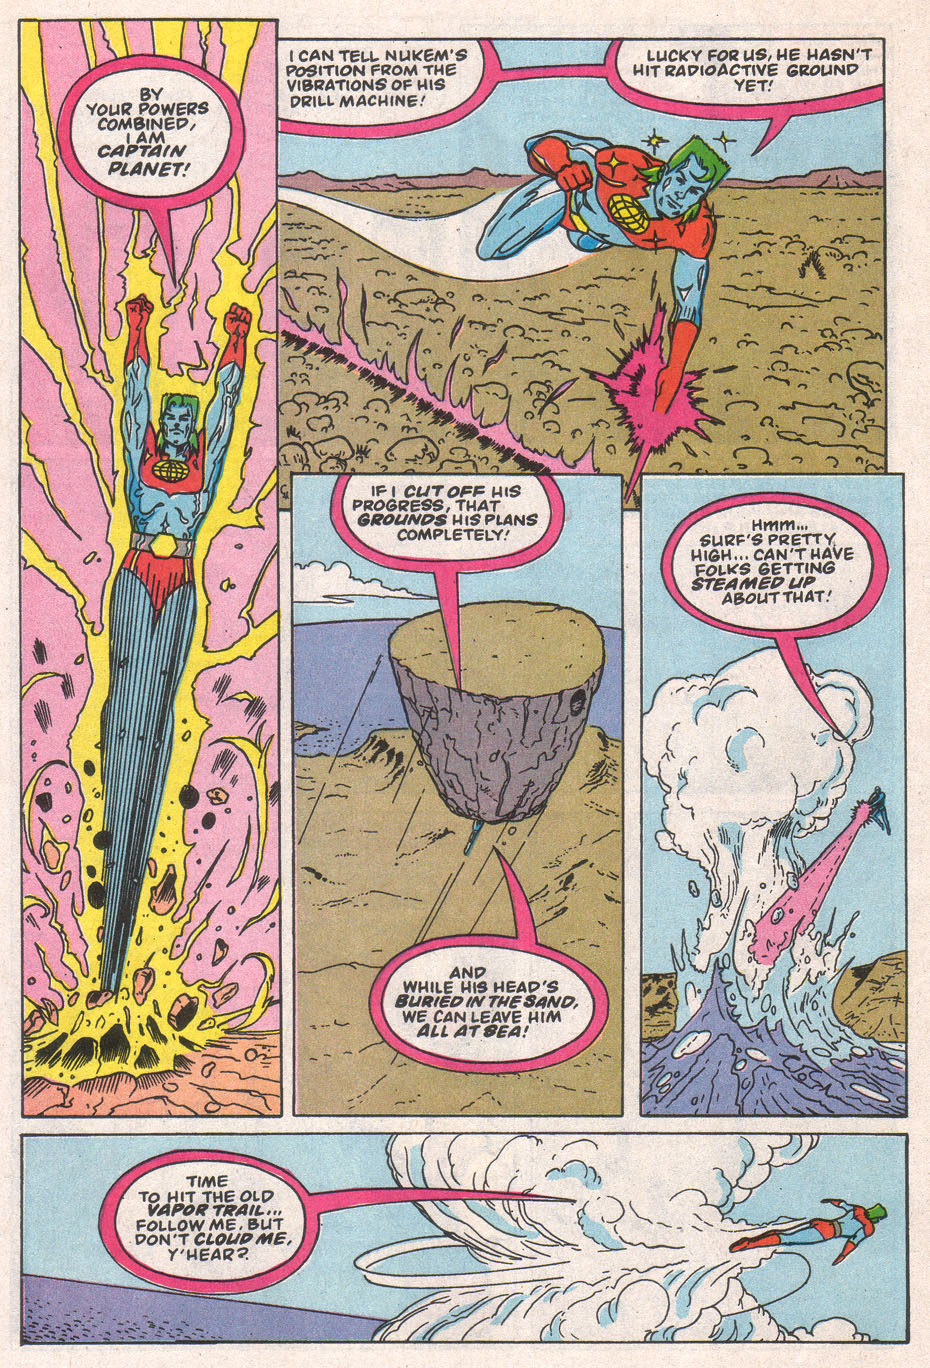 Captain Planet and the Planeteers 11 Page 30